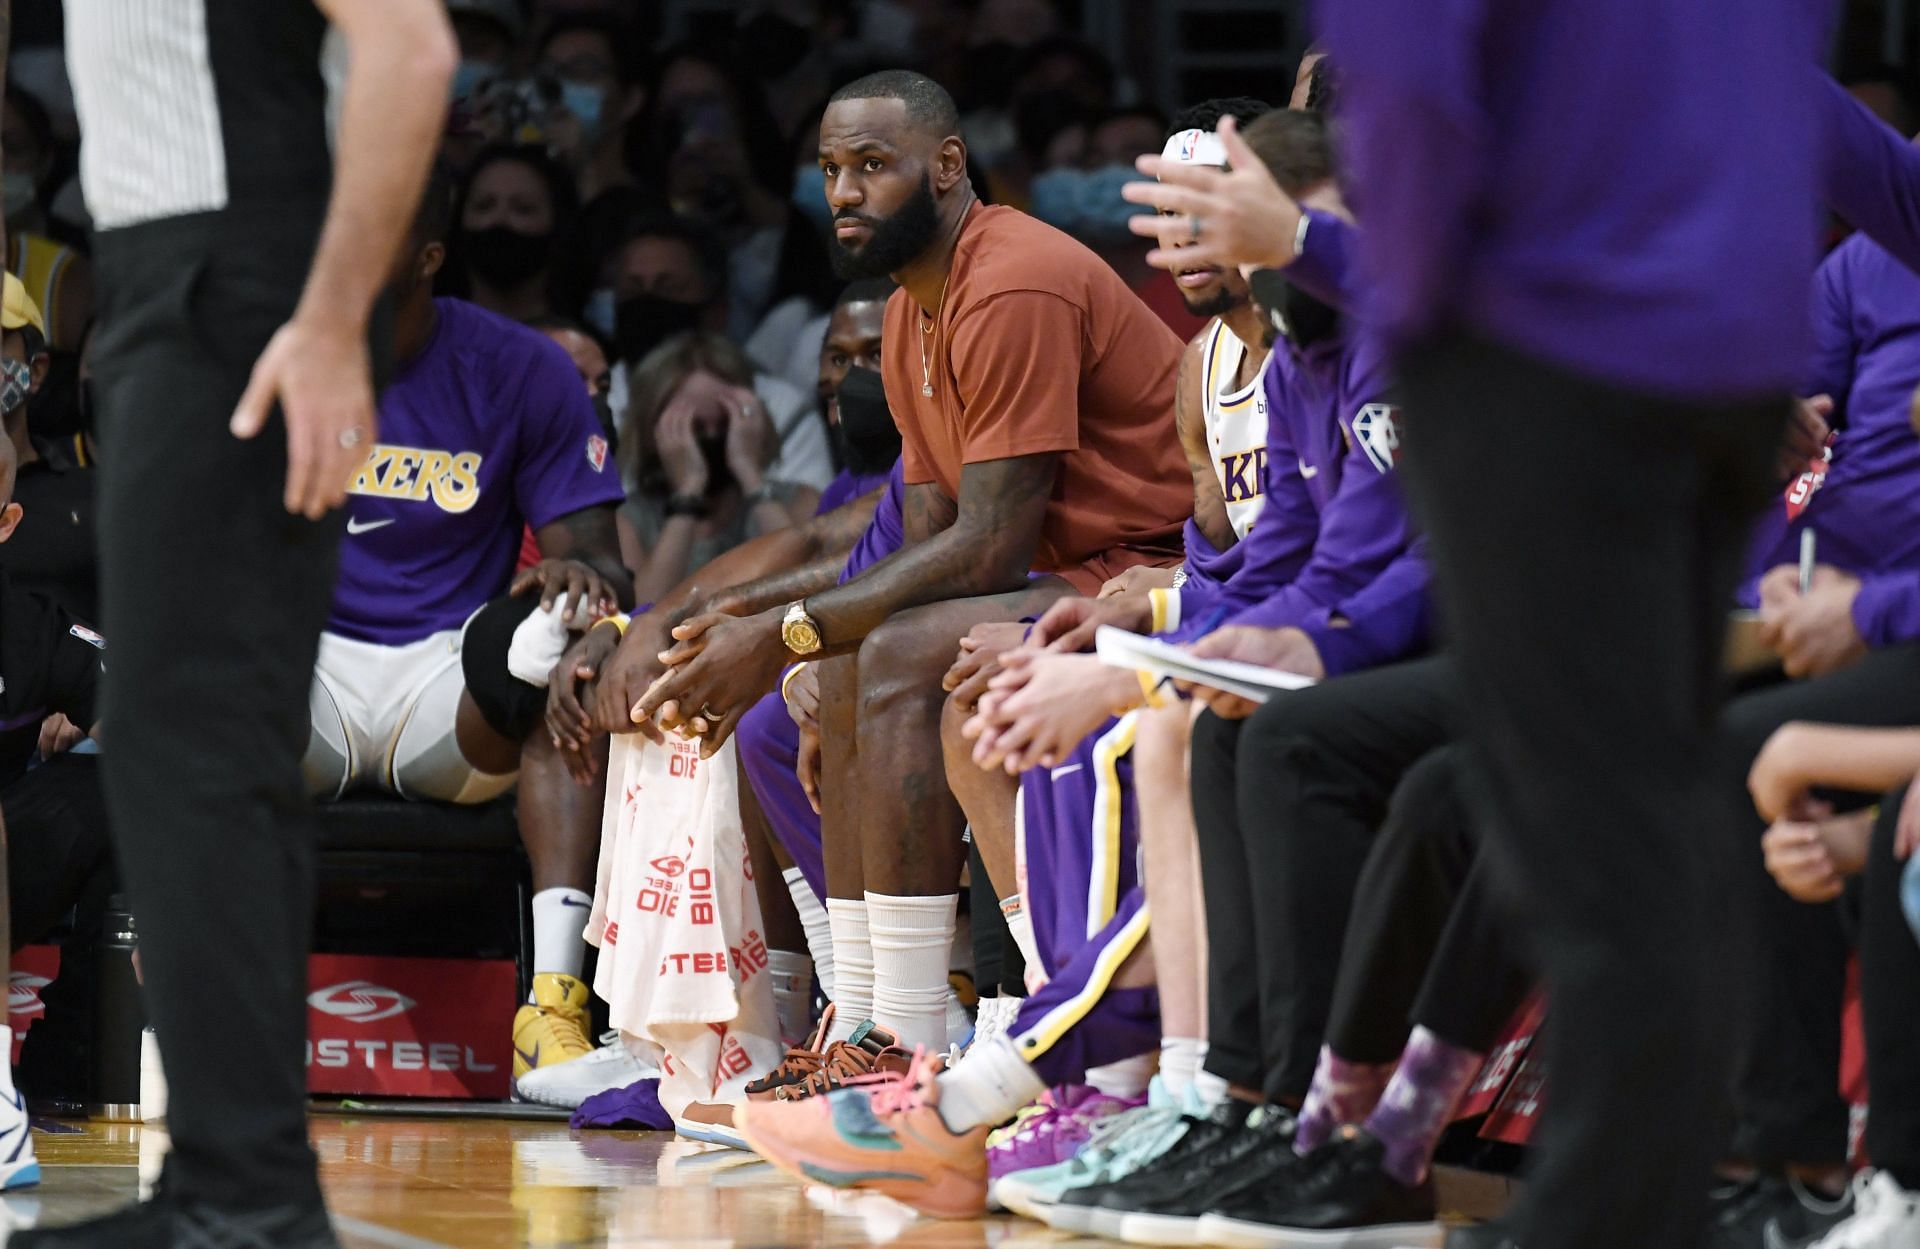 LeBron James #6 of the Los Angeles Lakers follows the action from the bench during a preseason game